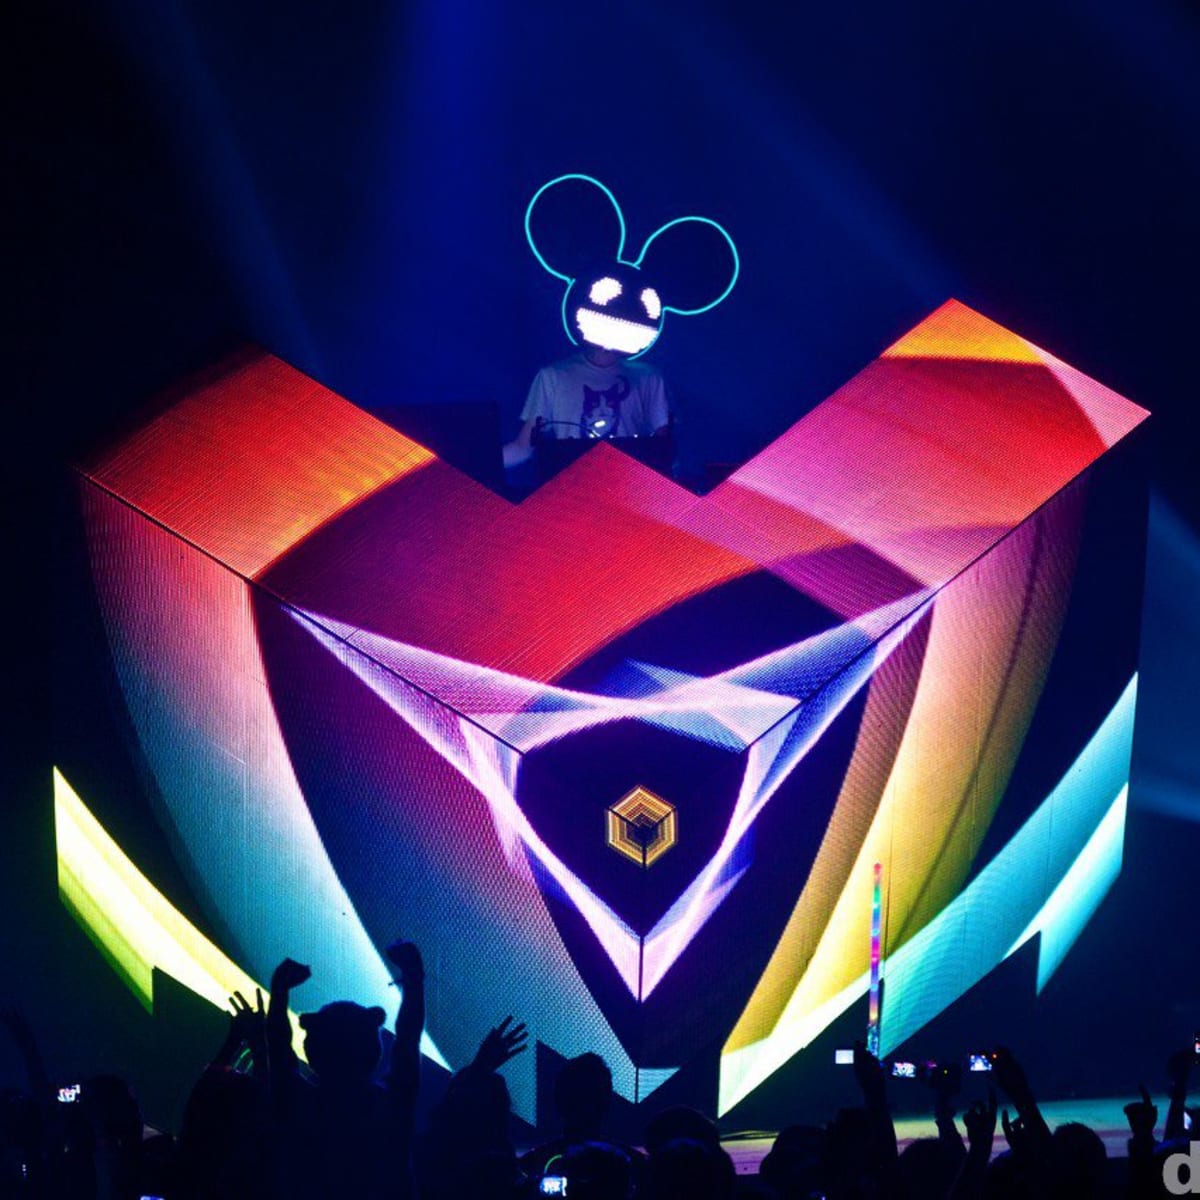 Deadmau5 Shares Initial Rendering Of Cube 3 0 Stage Concept Edm Com The Latest Electronic Dance Music News Reviews Artists